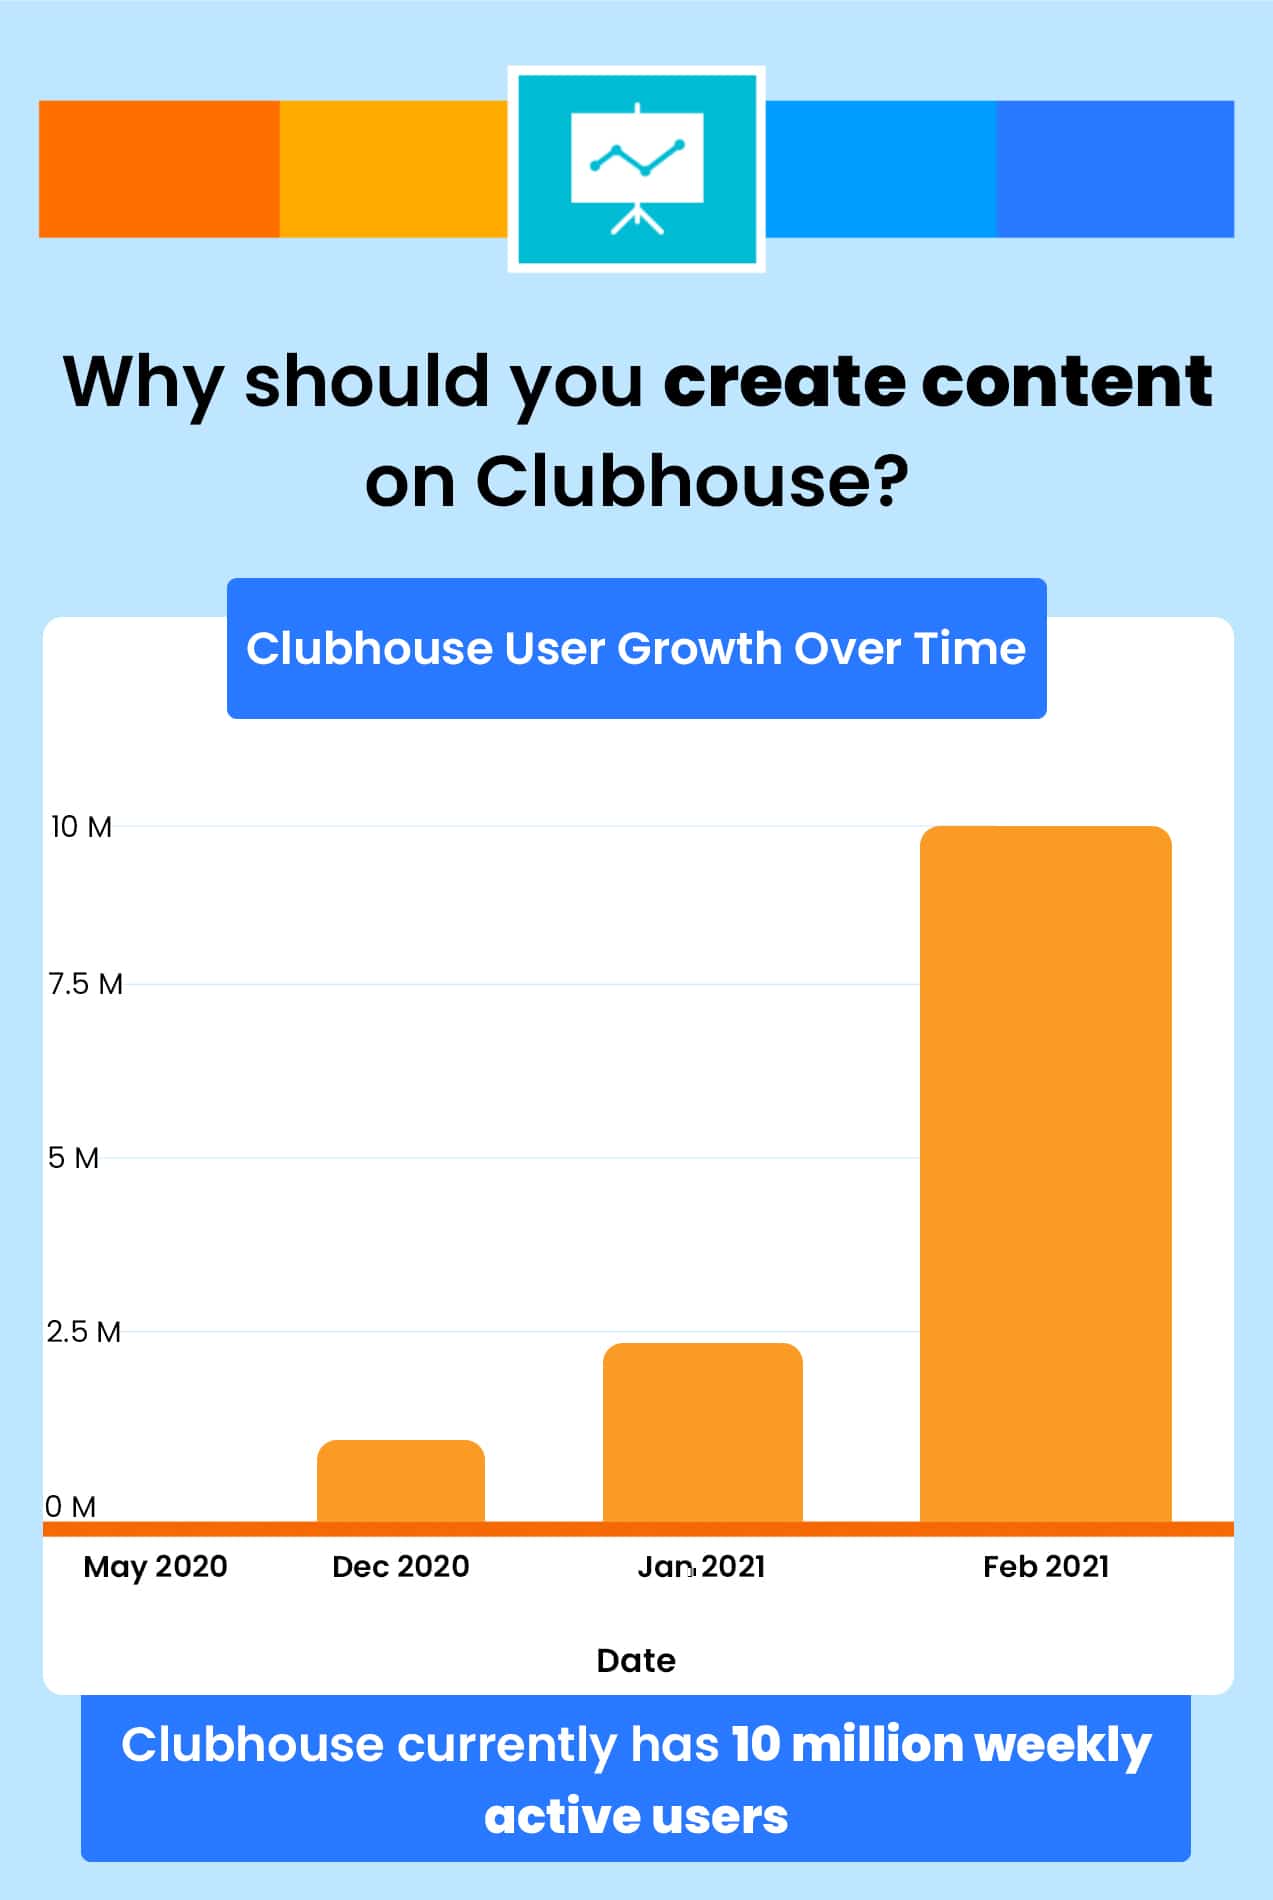 Clubhouse for content creator